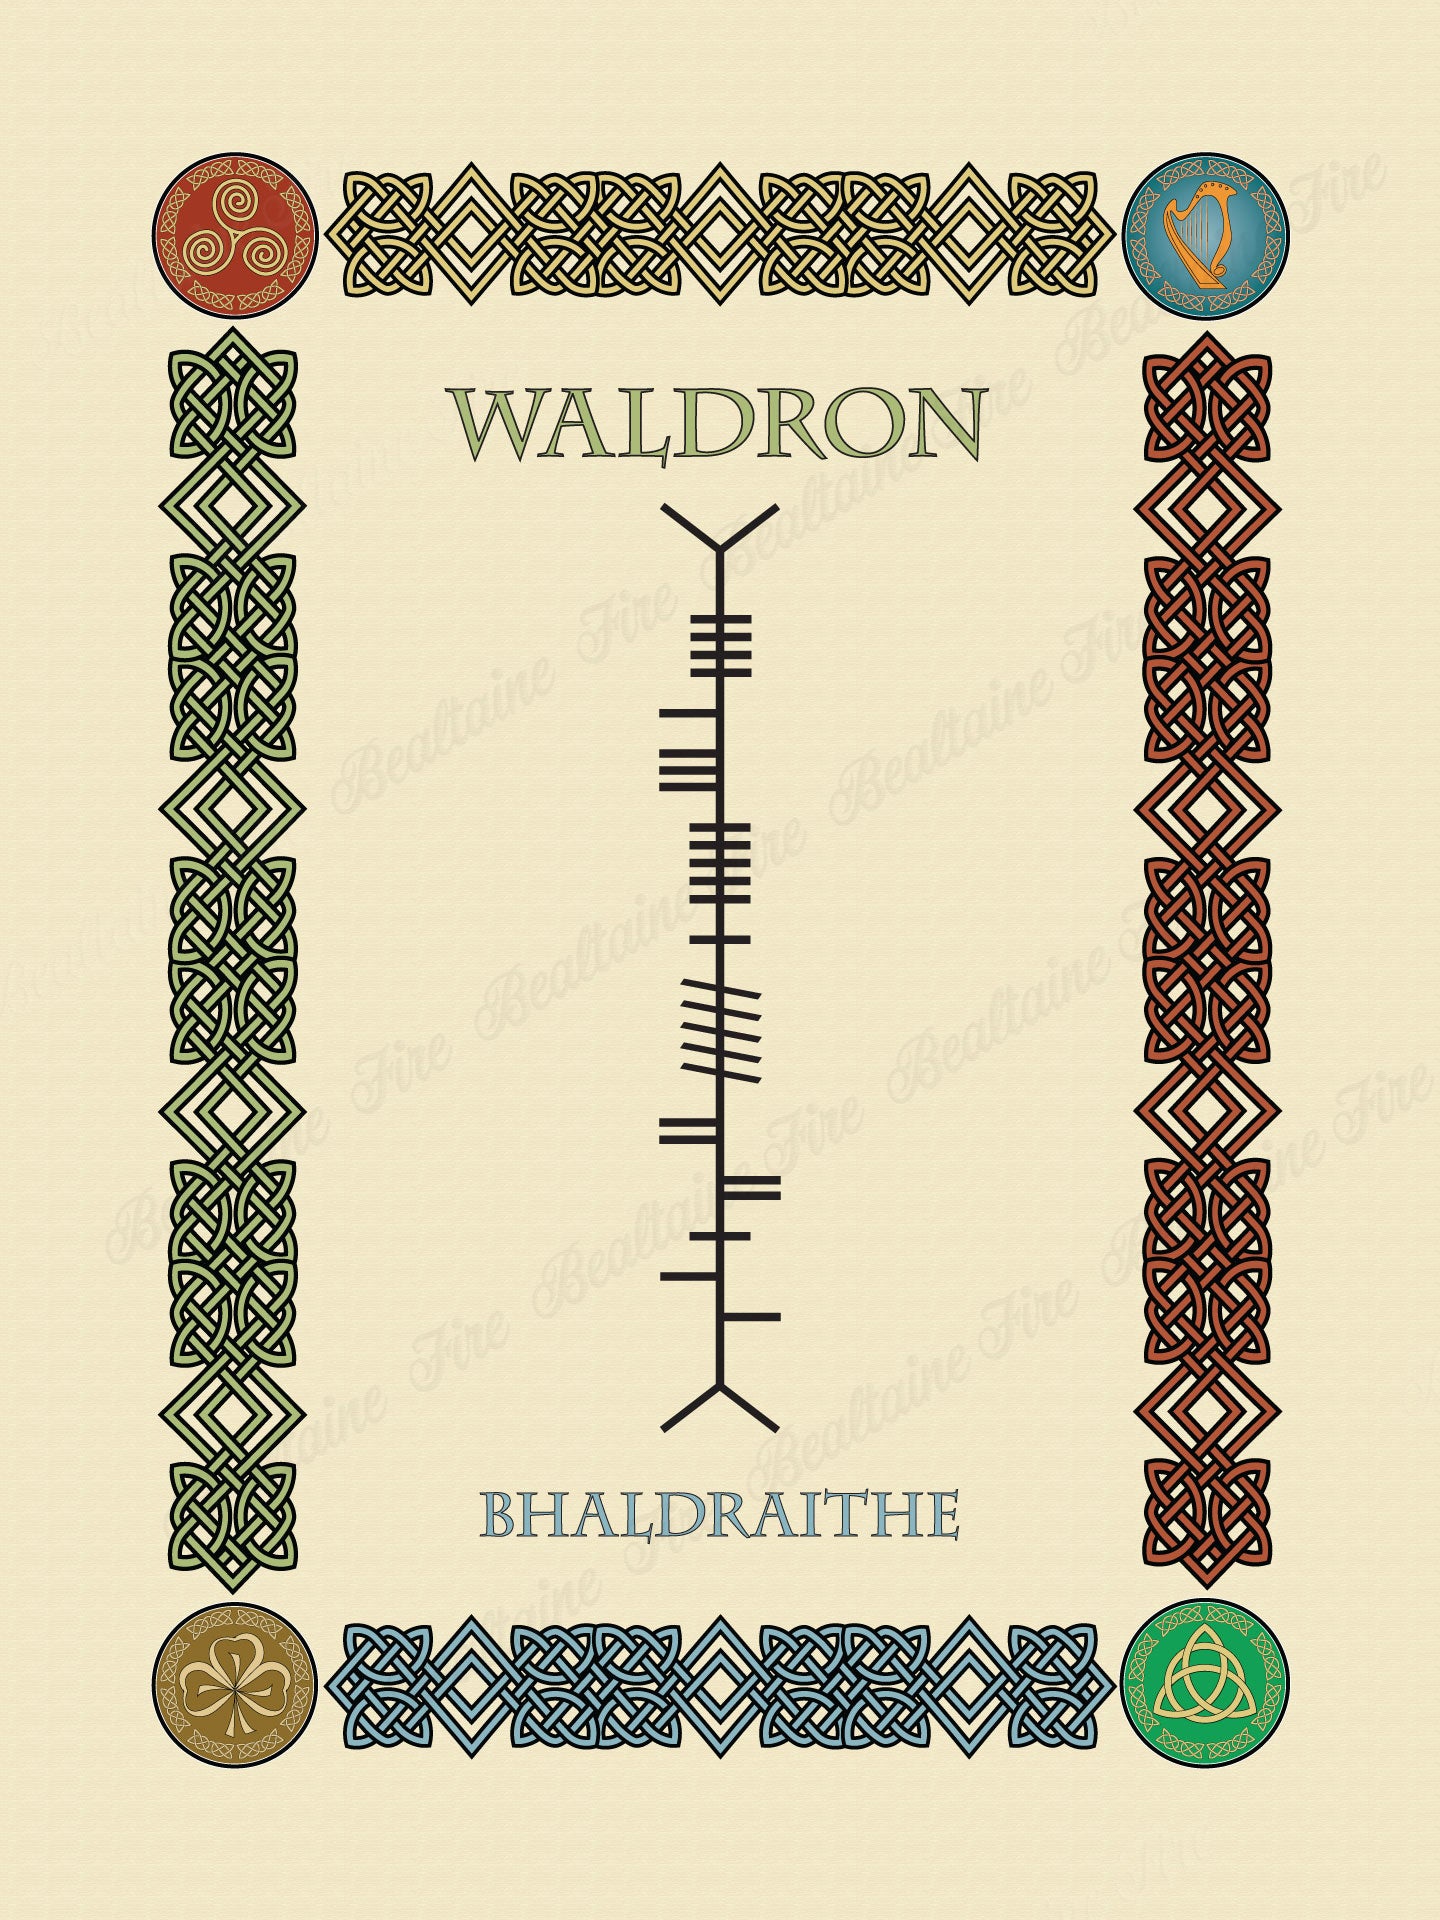 Waldron in Old Irish and Ogham - PDF Download